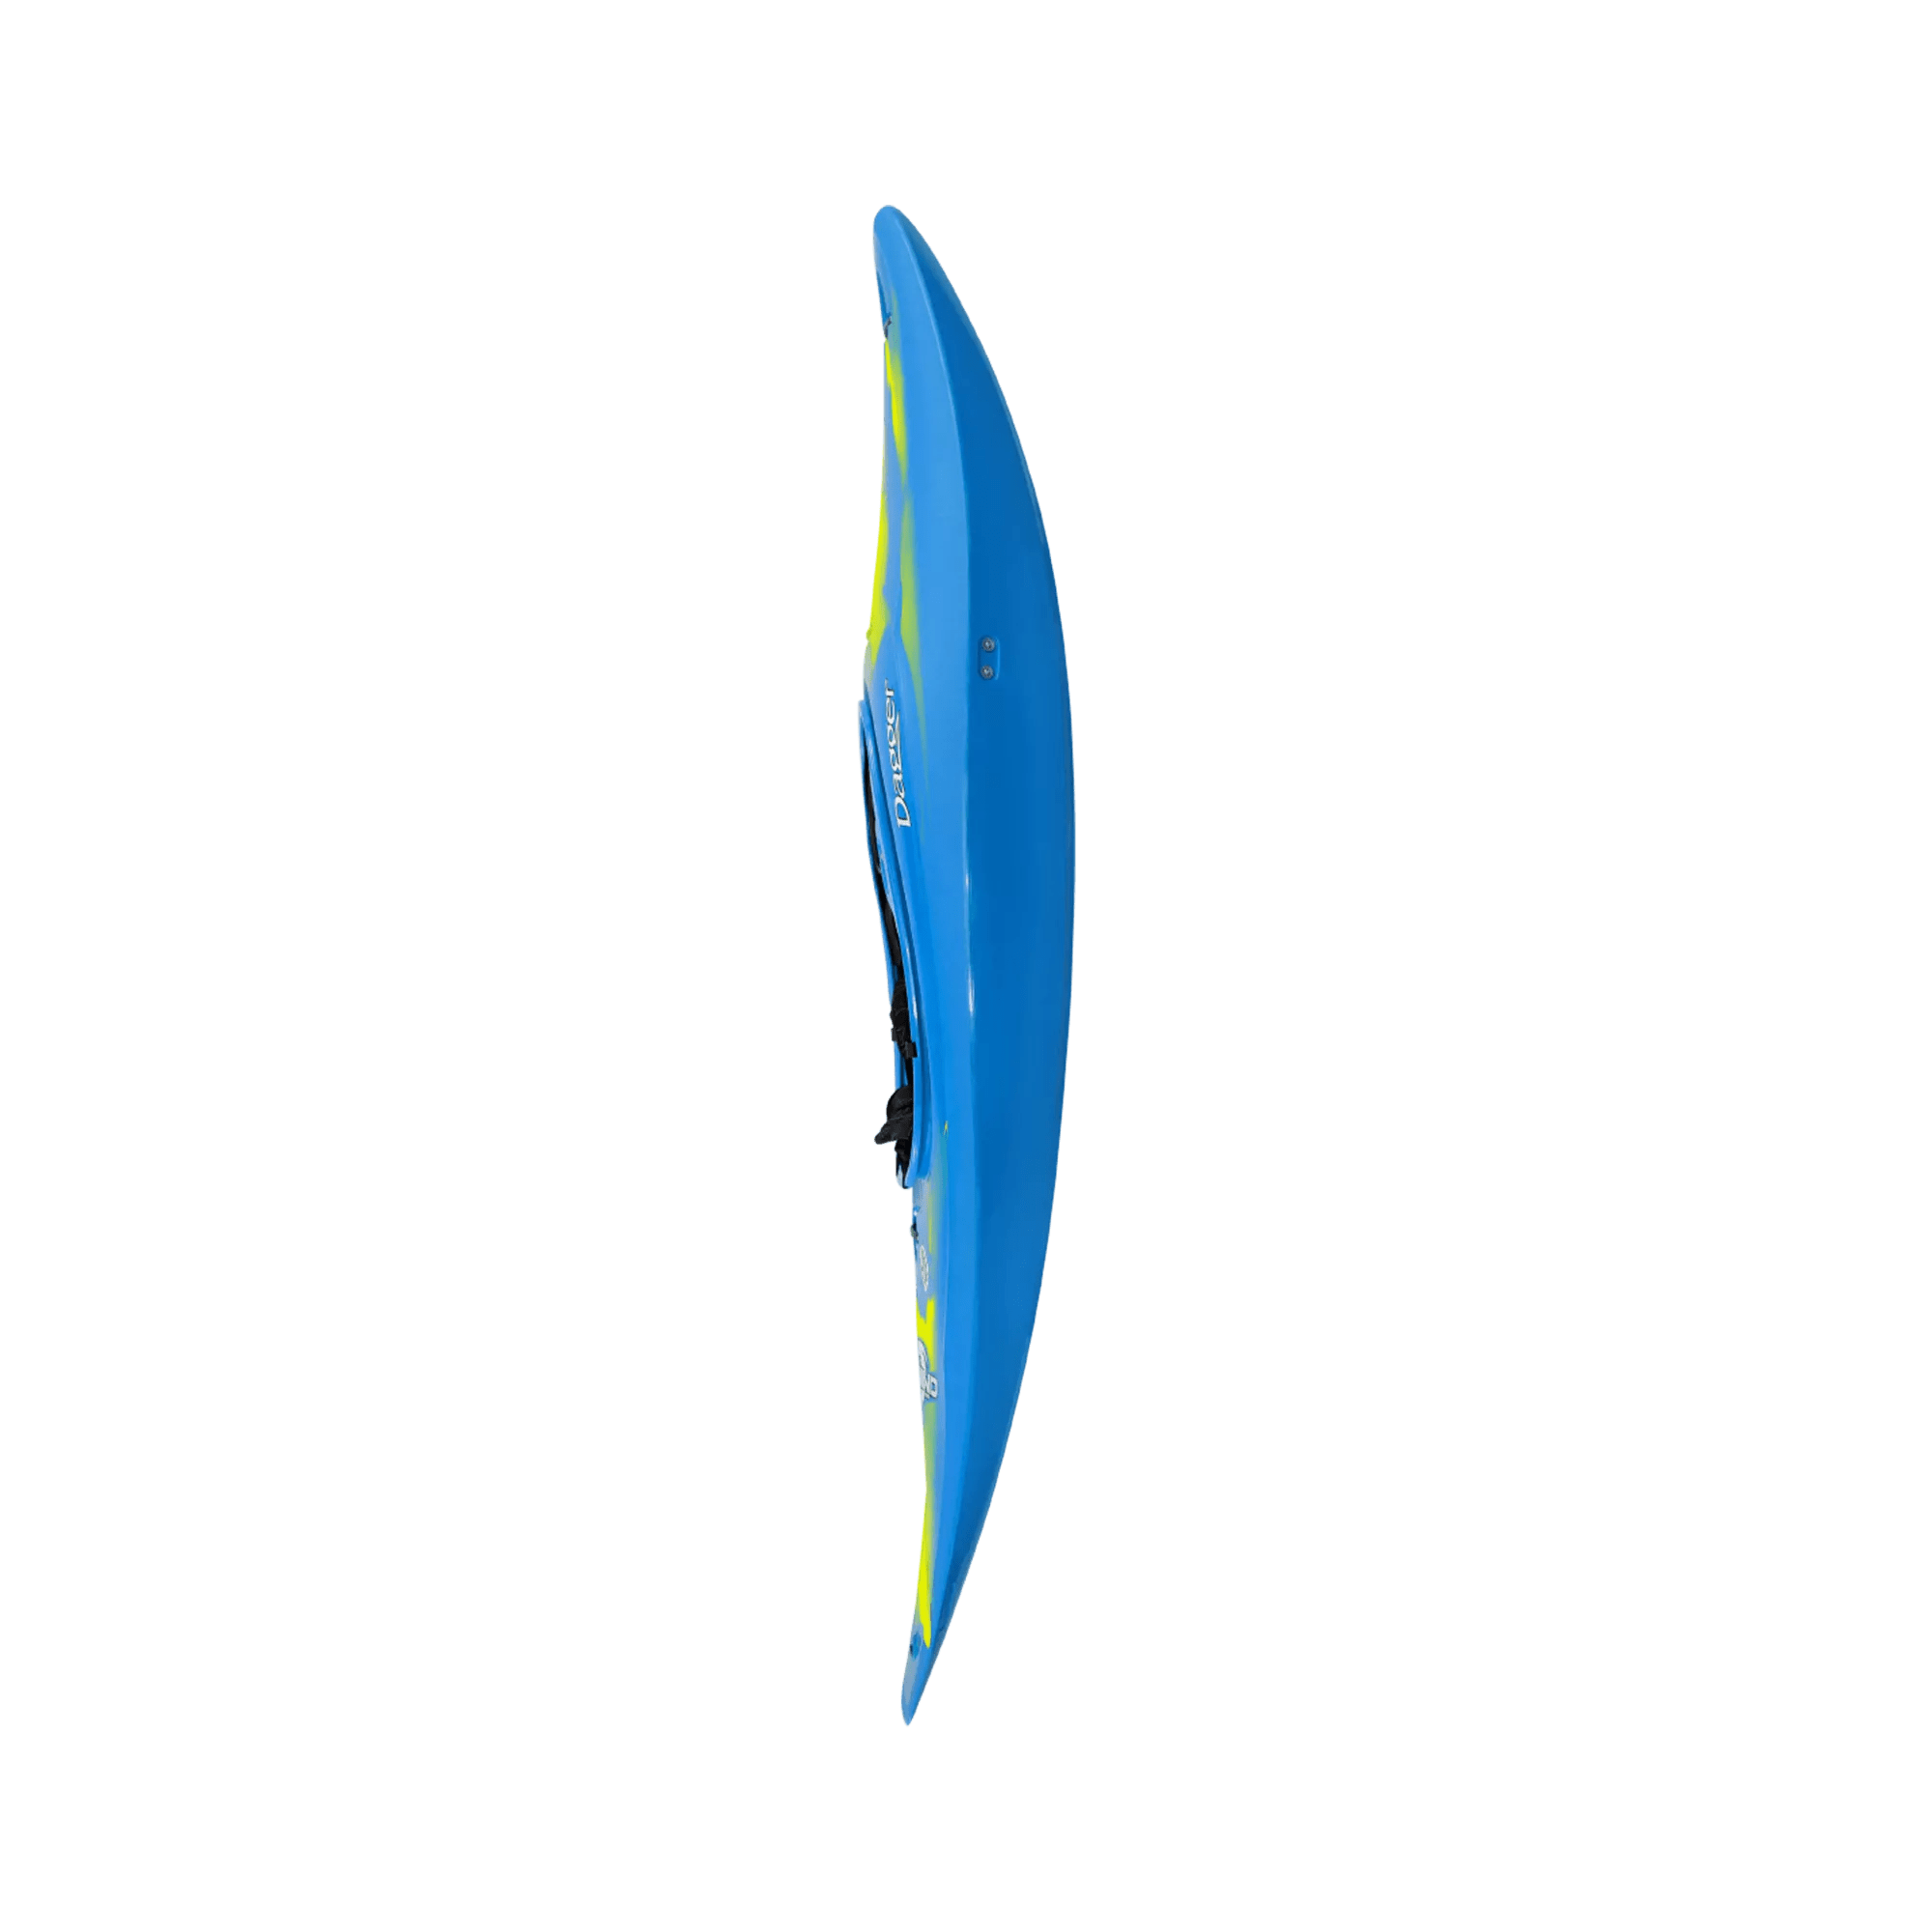 DAGGER - Rewind MD River Play Whitewater Kayak - Blue - 9010340197 - SIDE